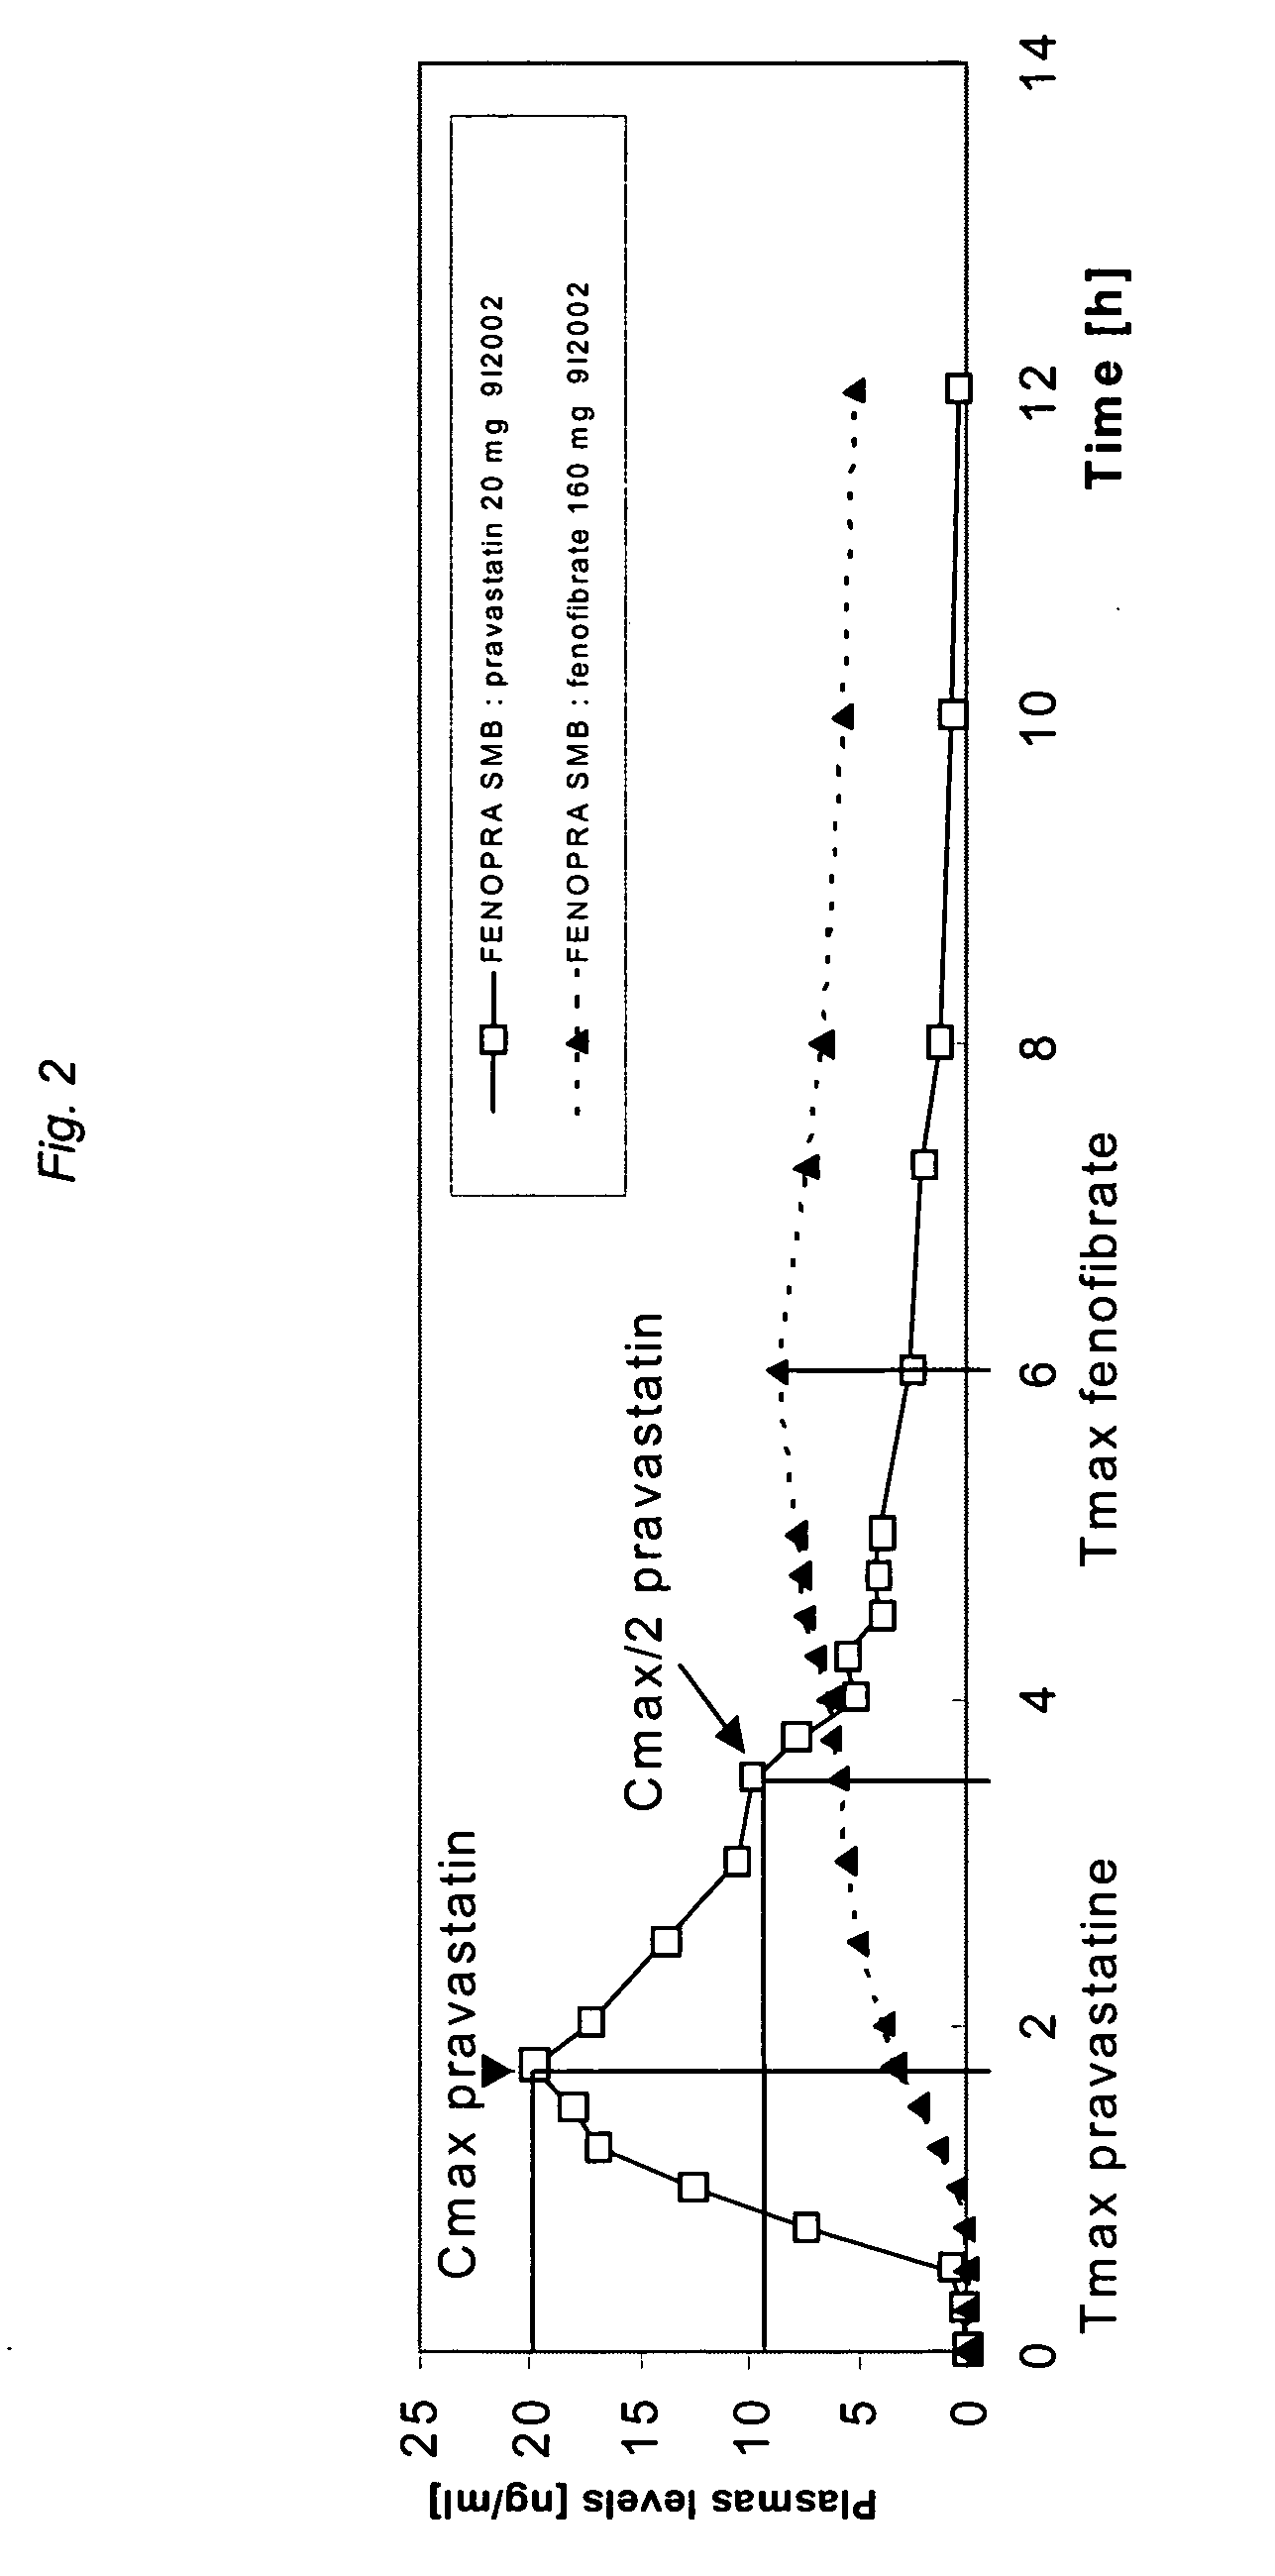 Stable controlled release pharmaceutical compositions containing fenofibrate and pravastatin